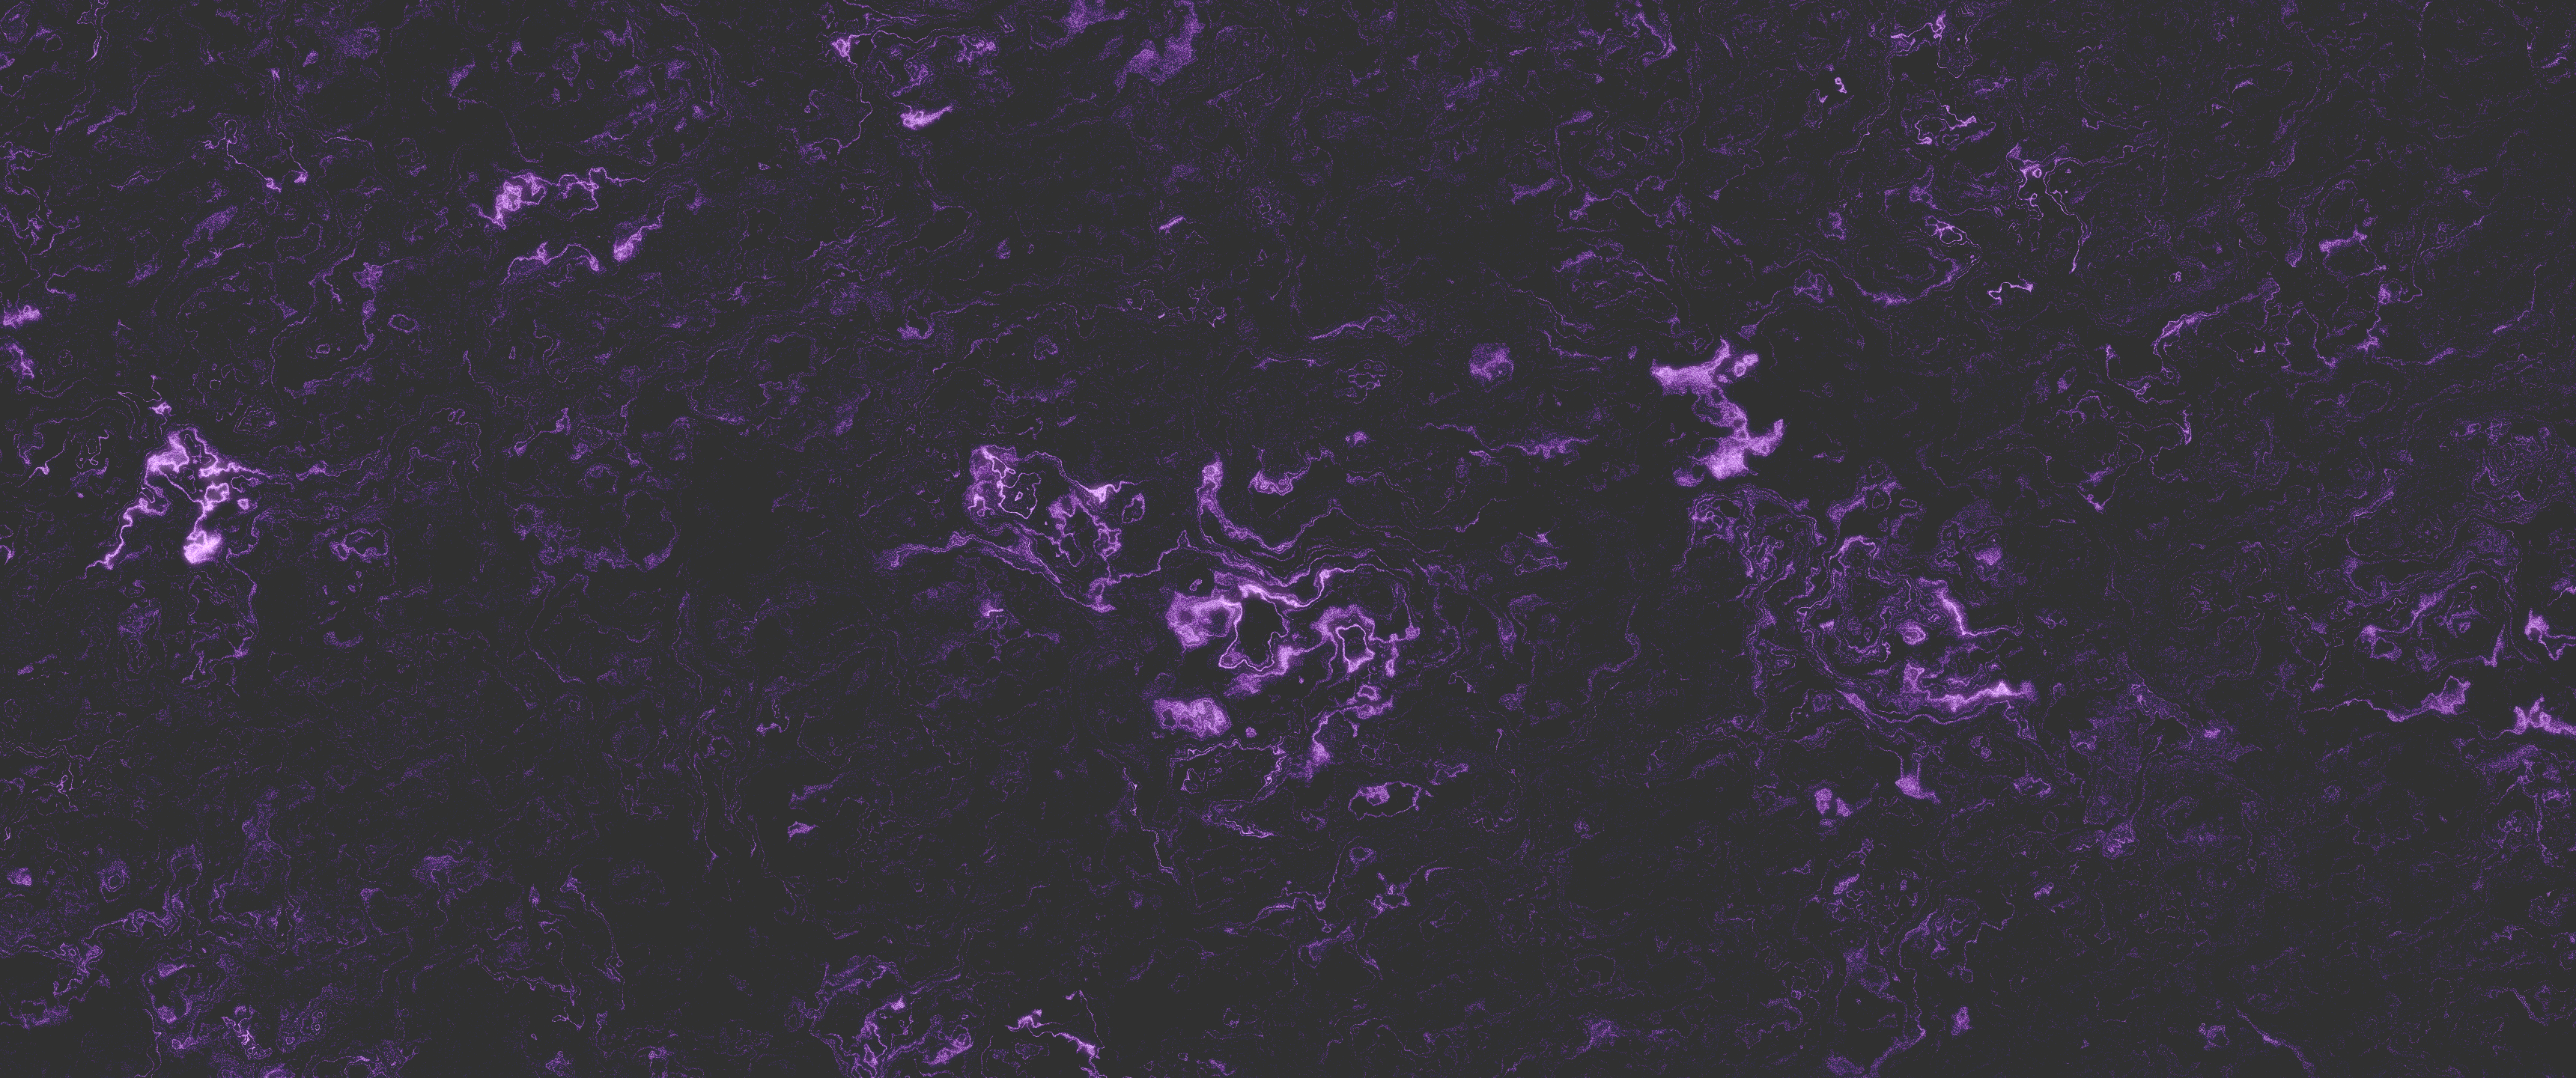 Purple Wide Image Abstract 3440x1440